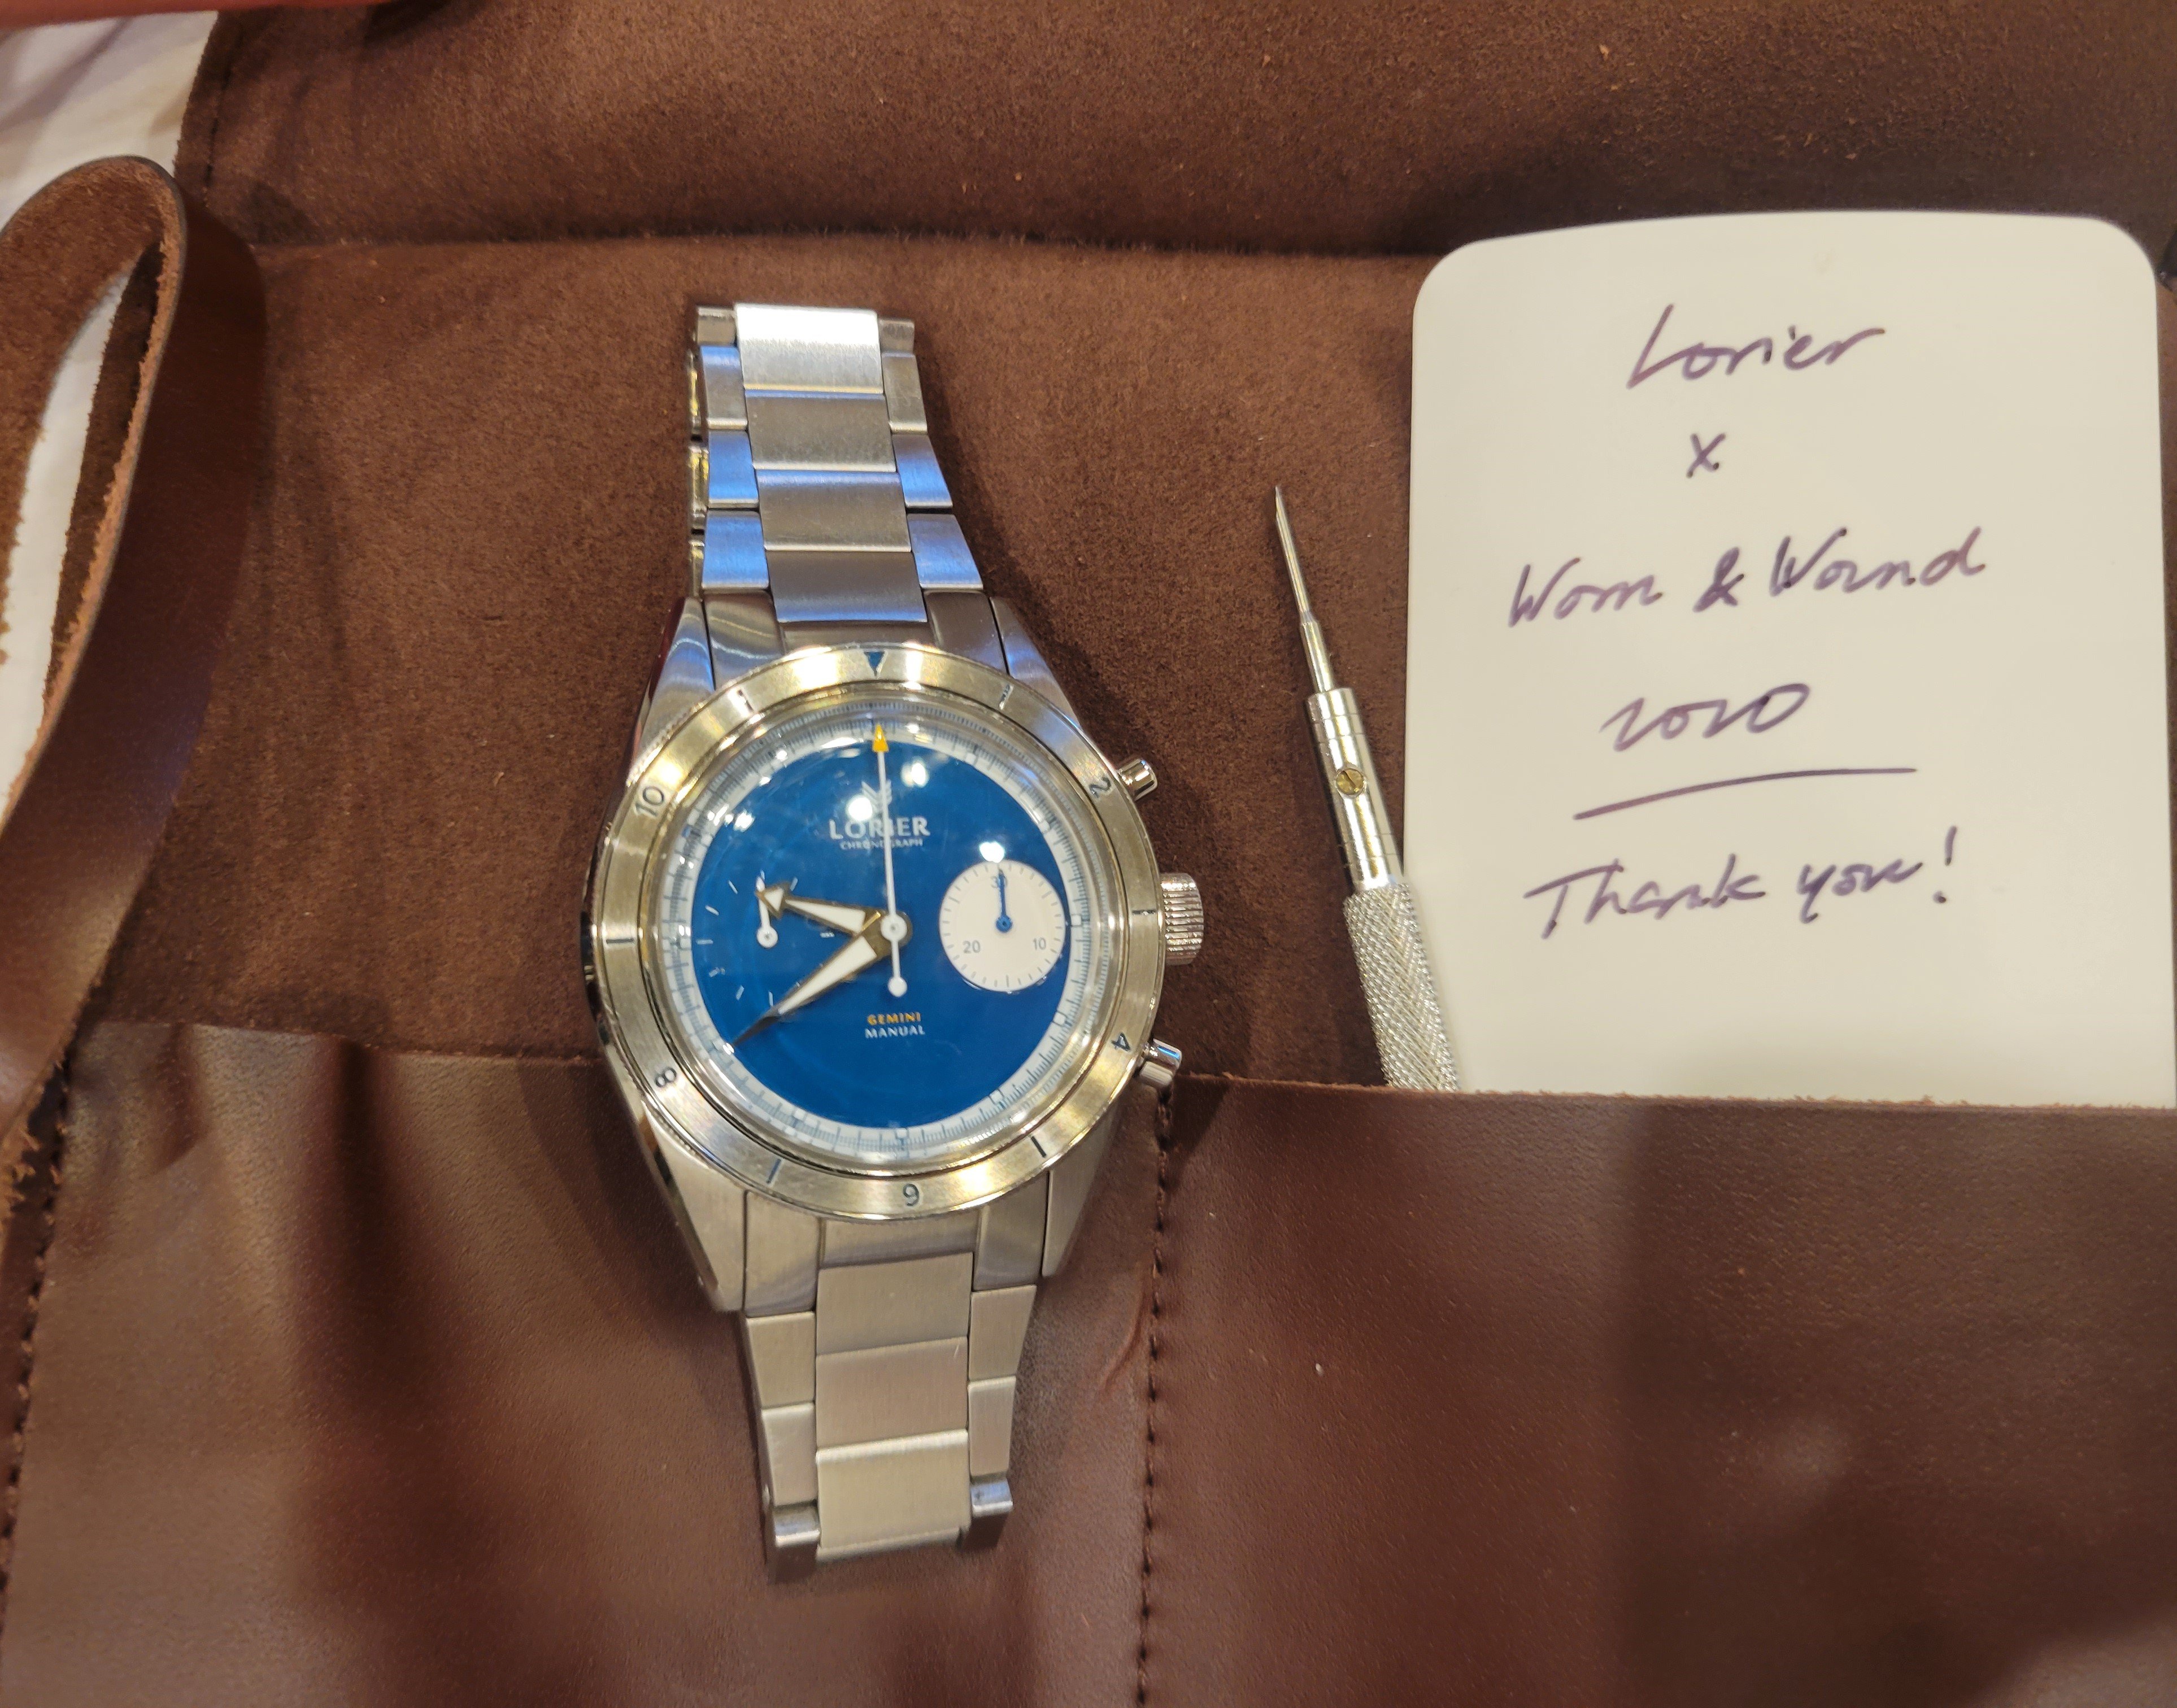 750 USD] Lorier Gemini Worn and Wound Limited Edition